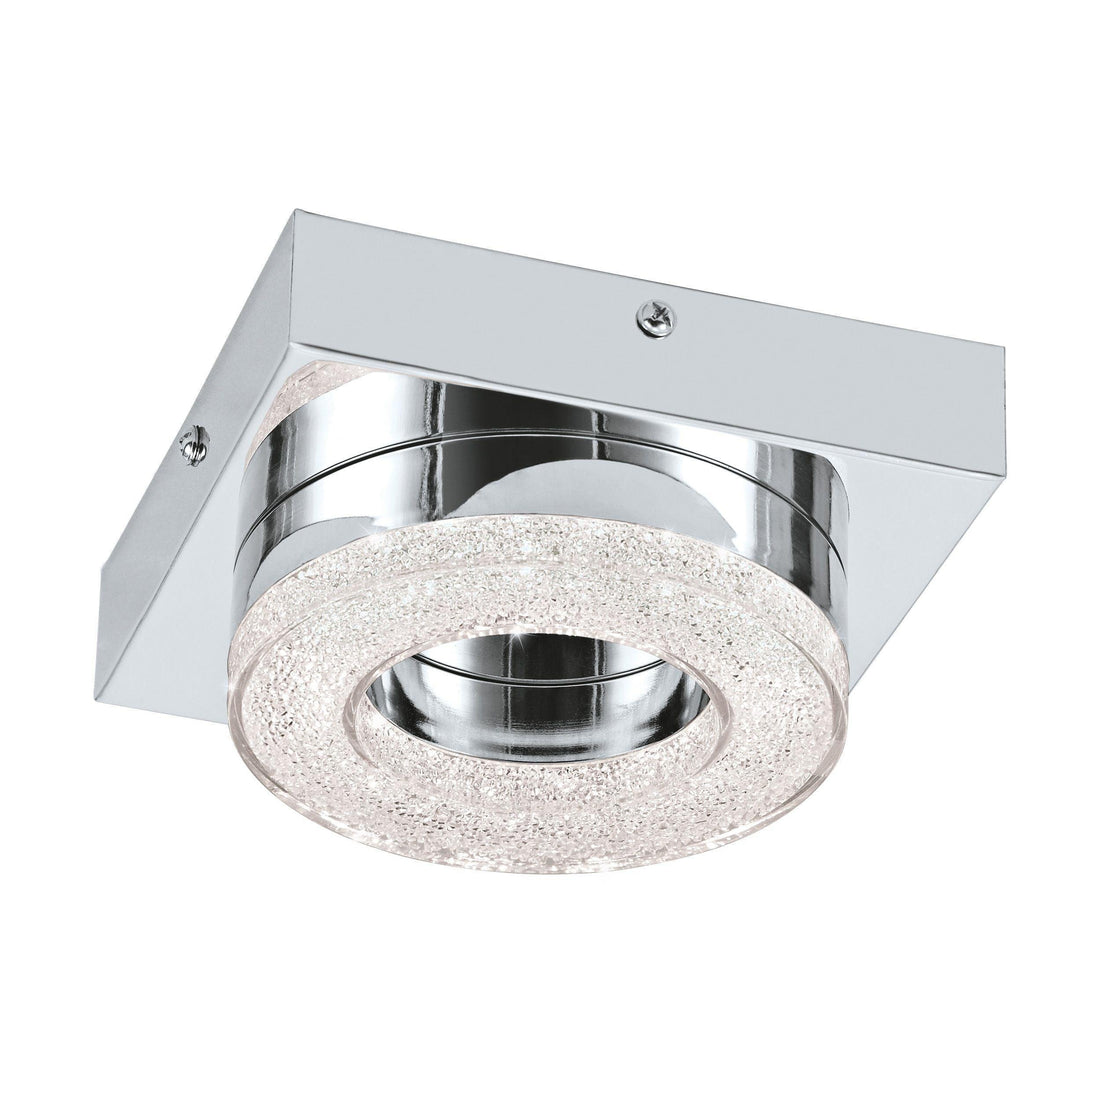 FRADELO Round Ceiling light by The Light Library